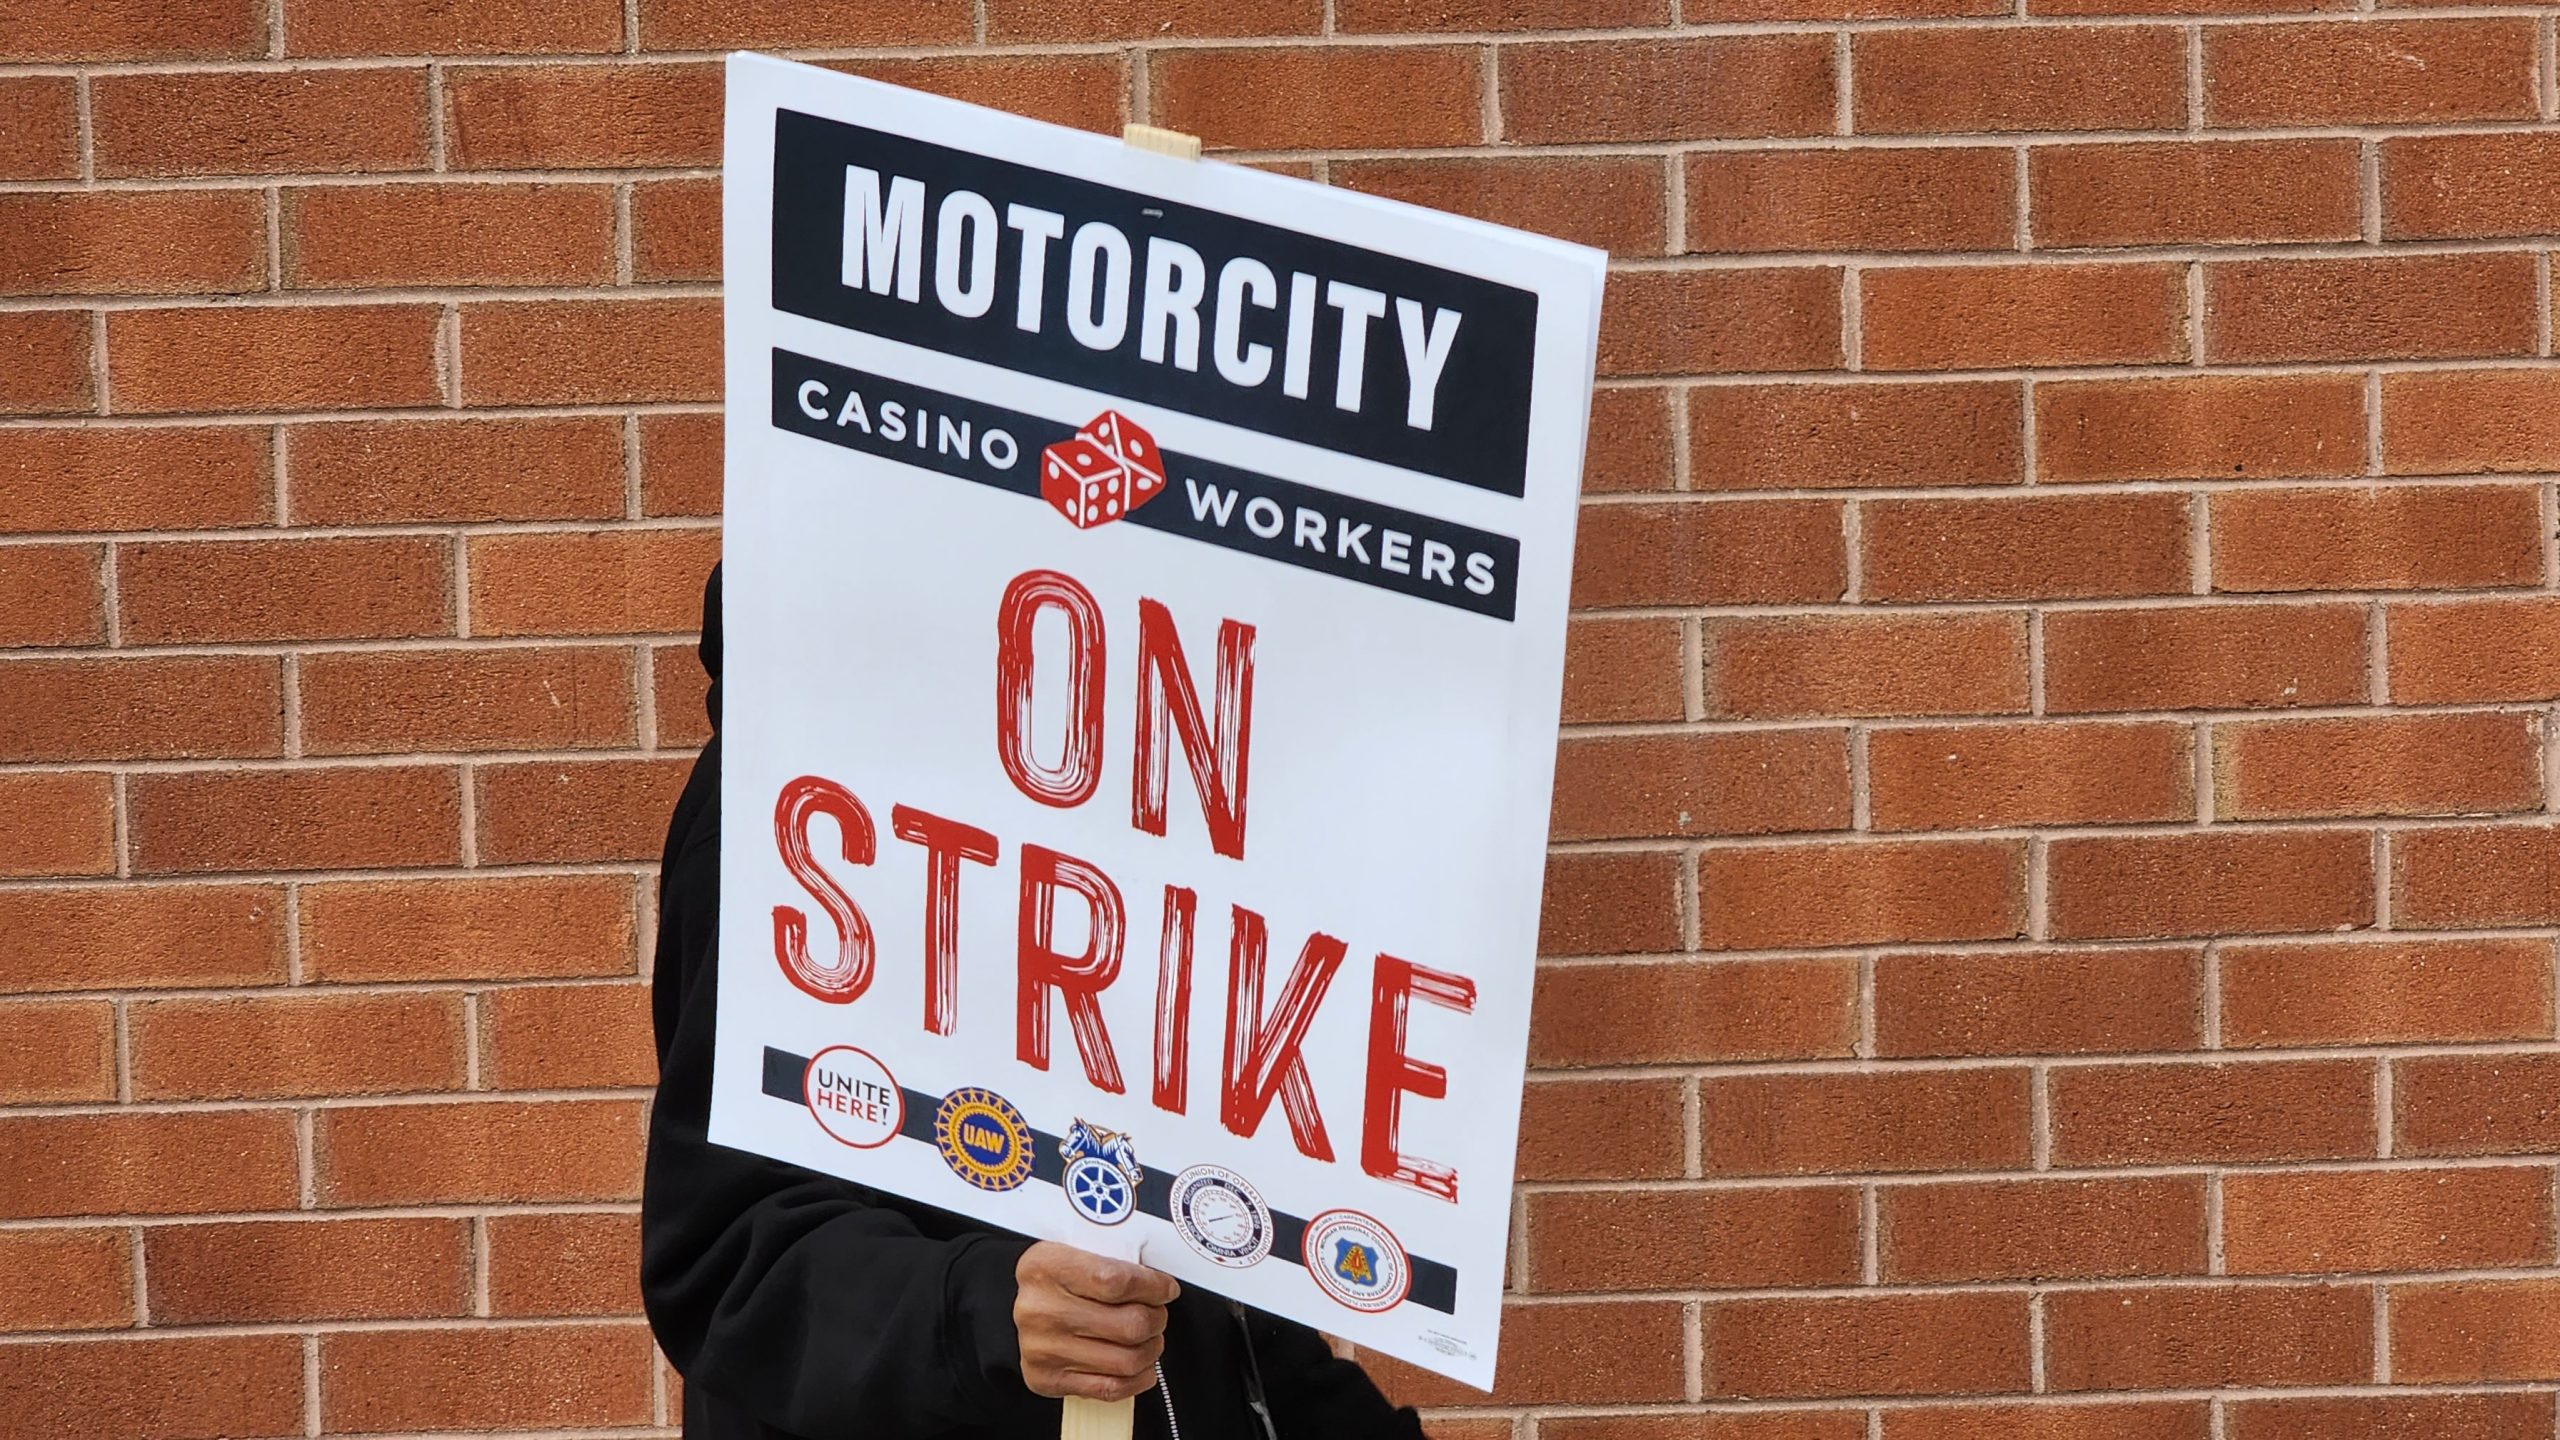 A casino worker marches with a picket sign.